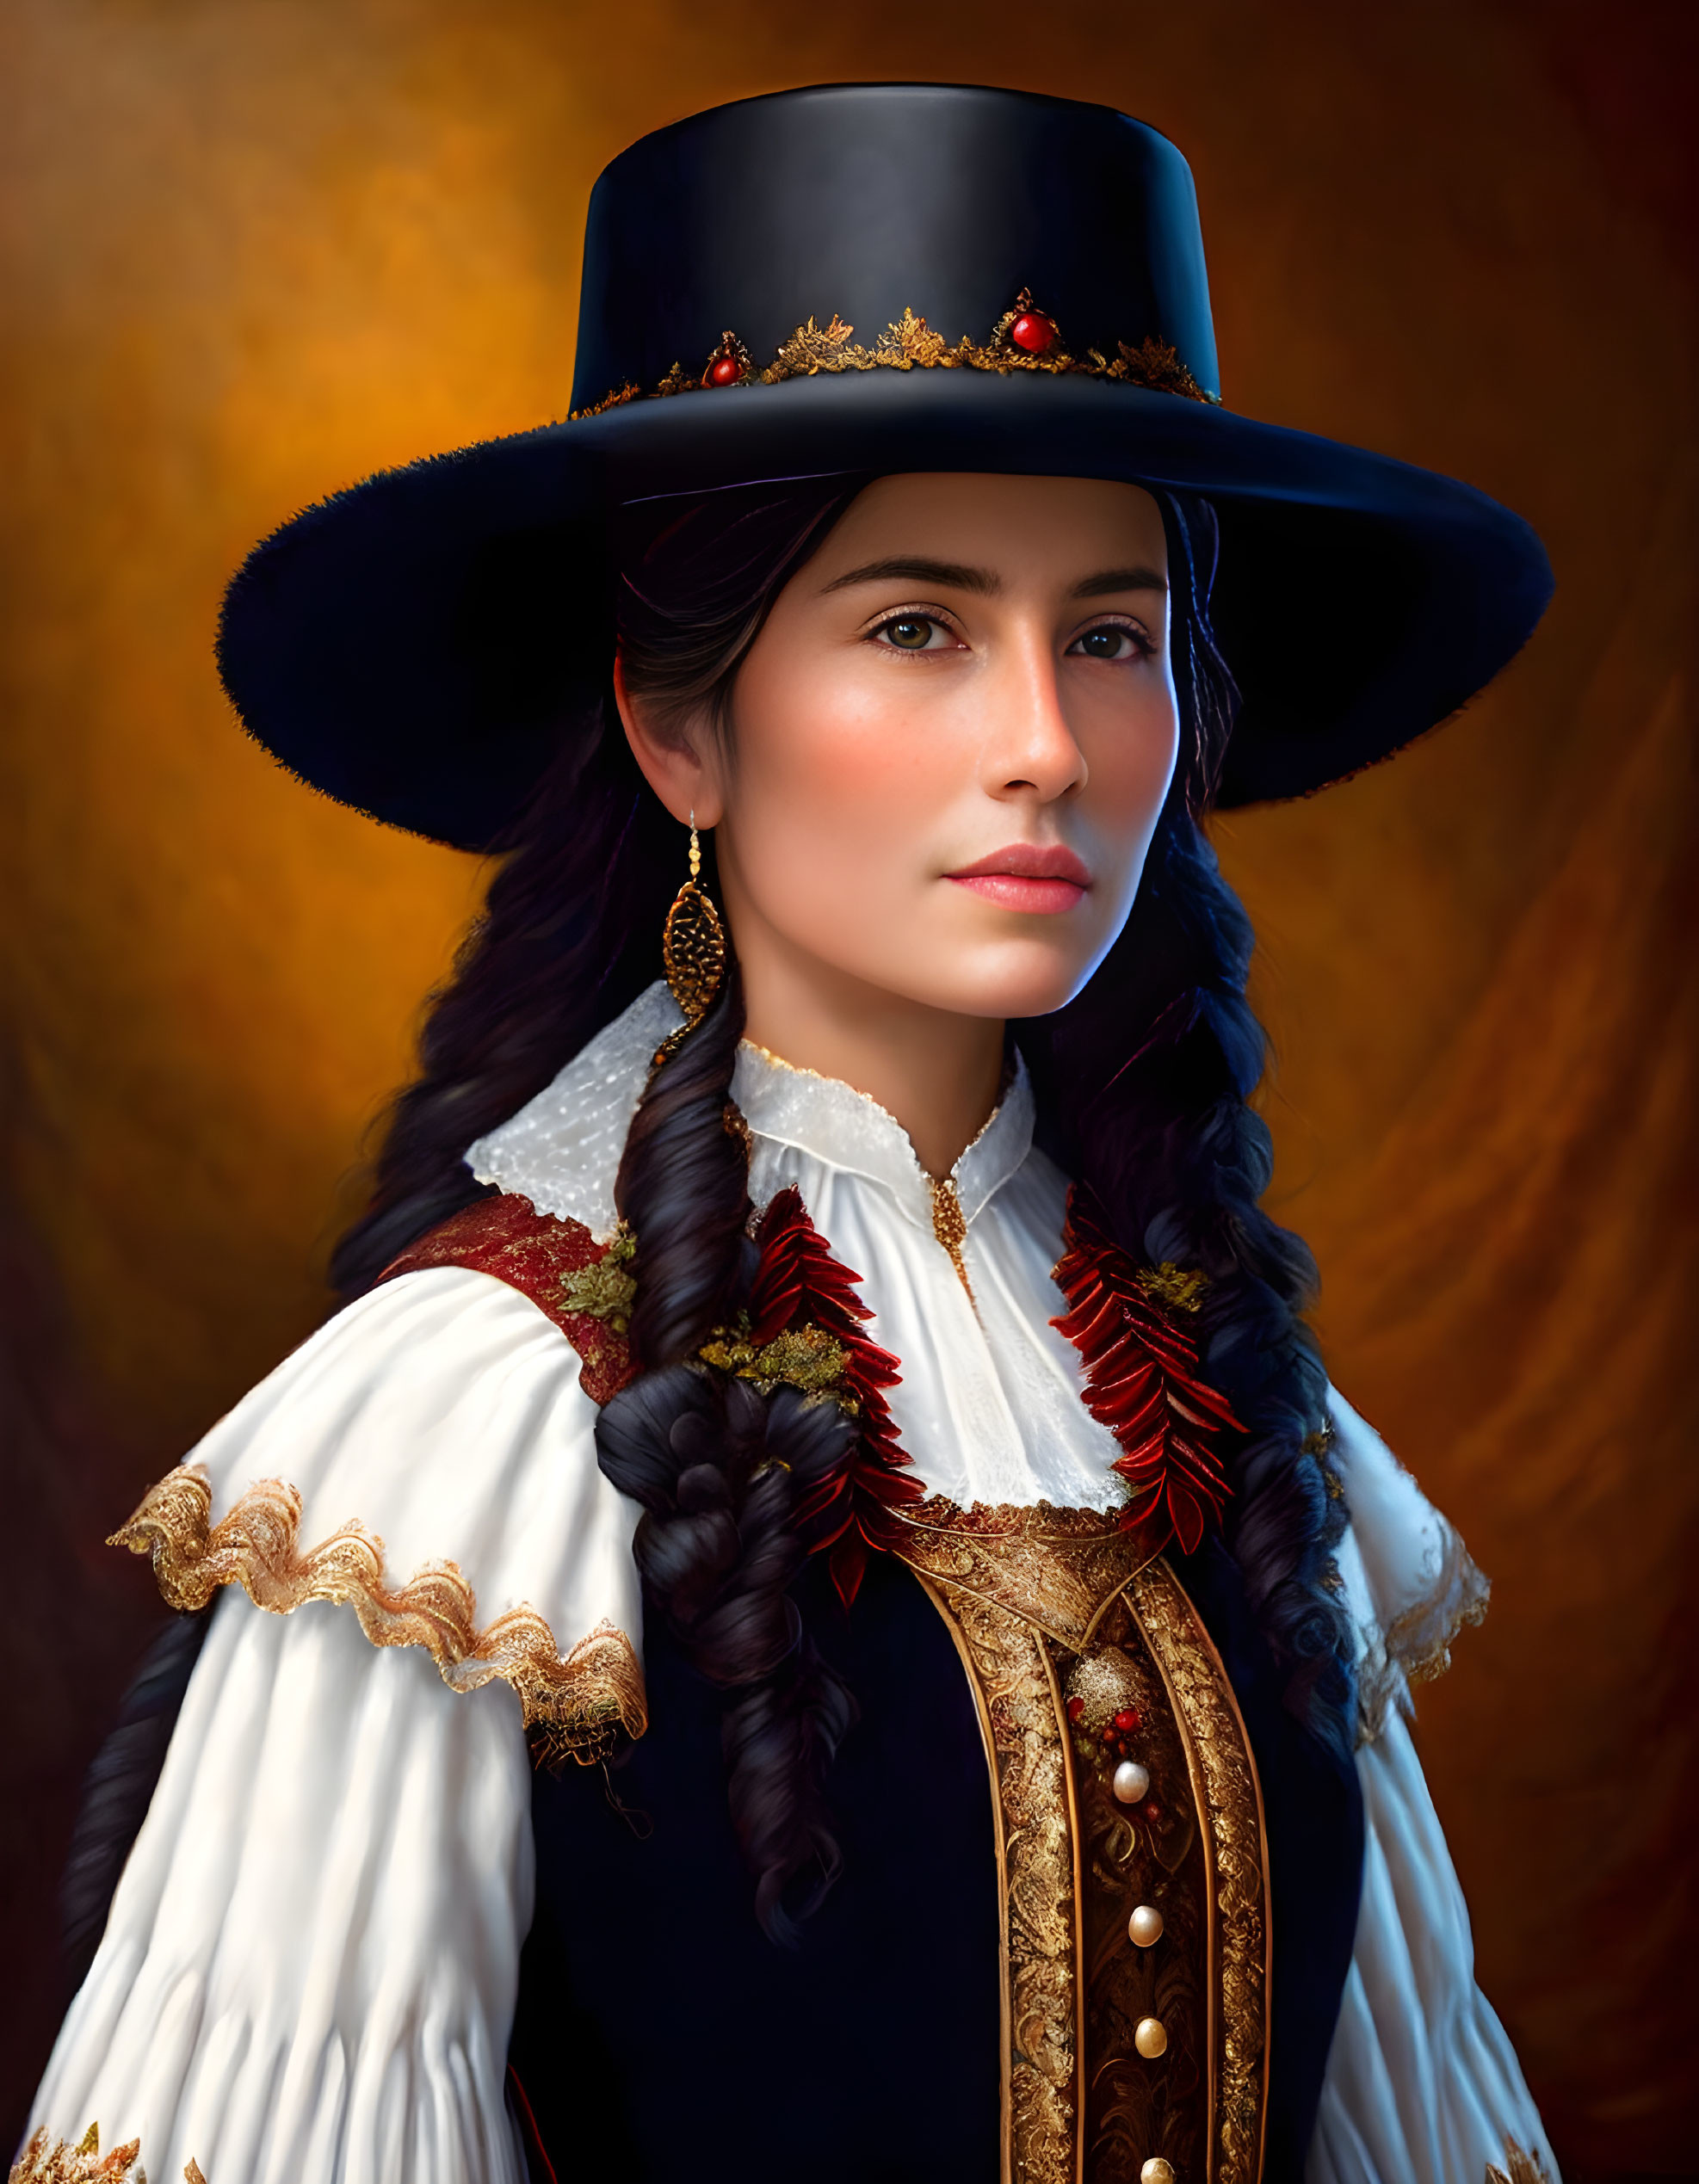 Woman portrait with braided hairstyle, wide-brimmed hat, floral adornments, ruffled sleeves